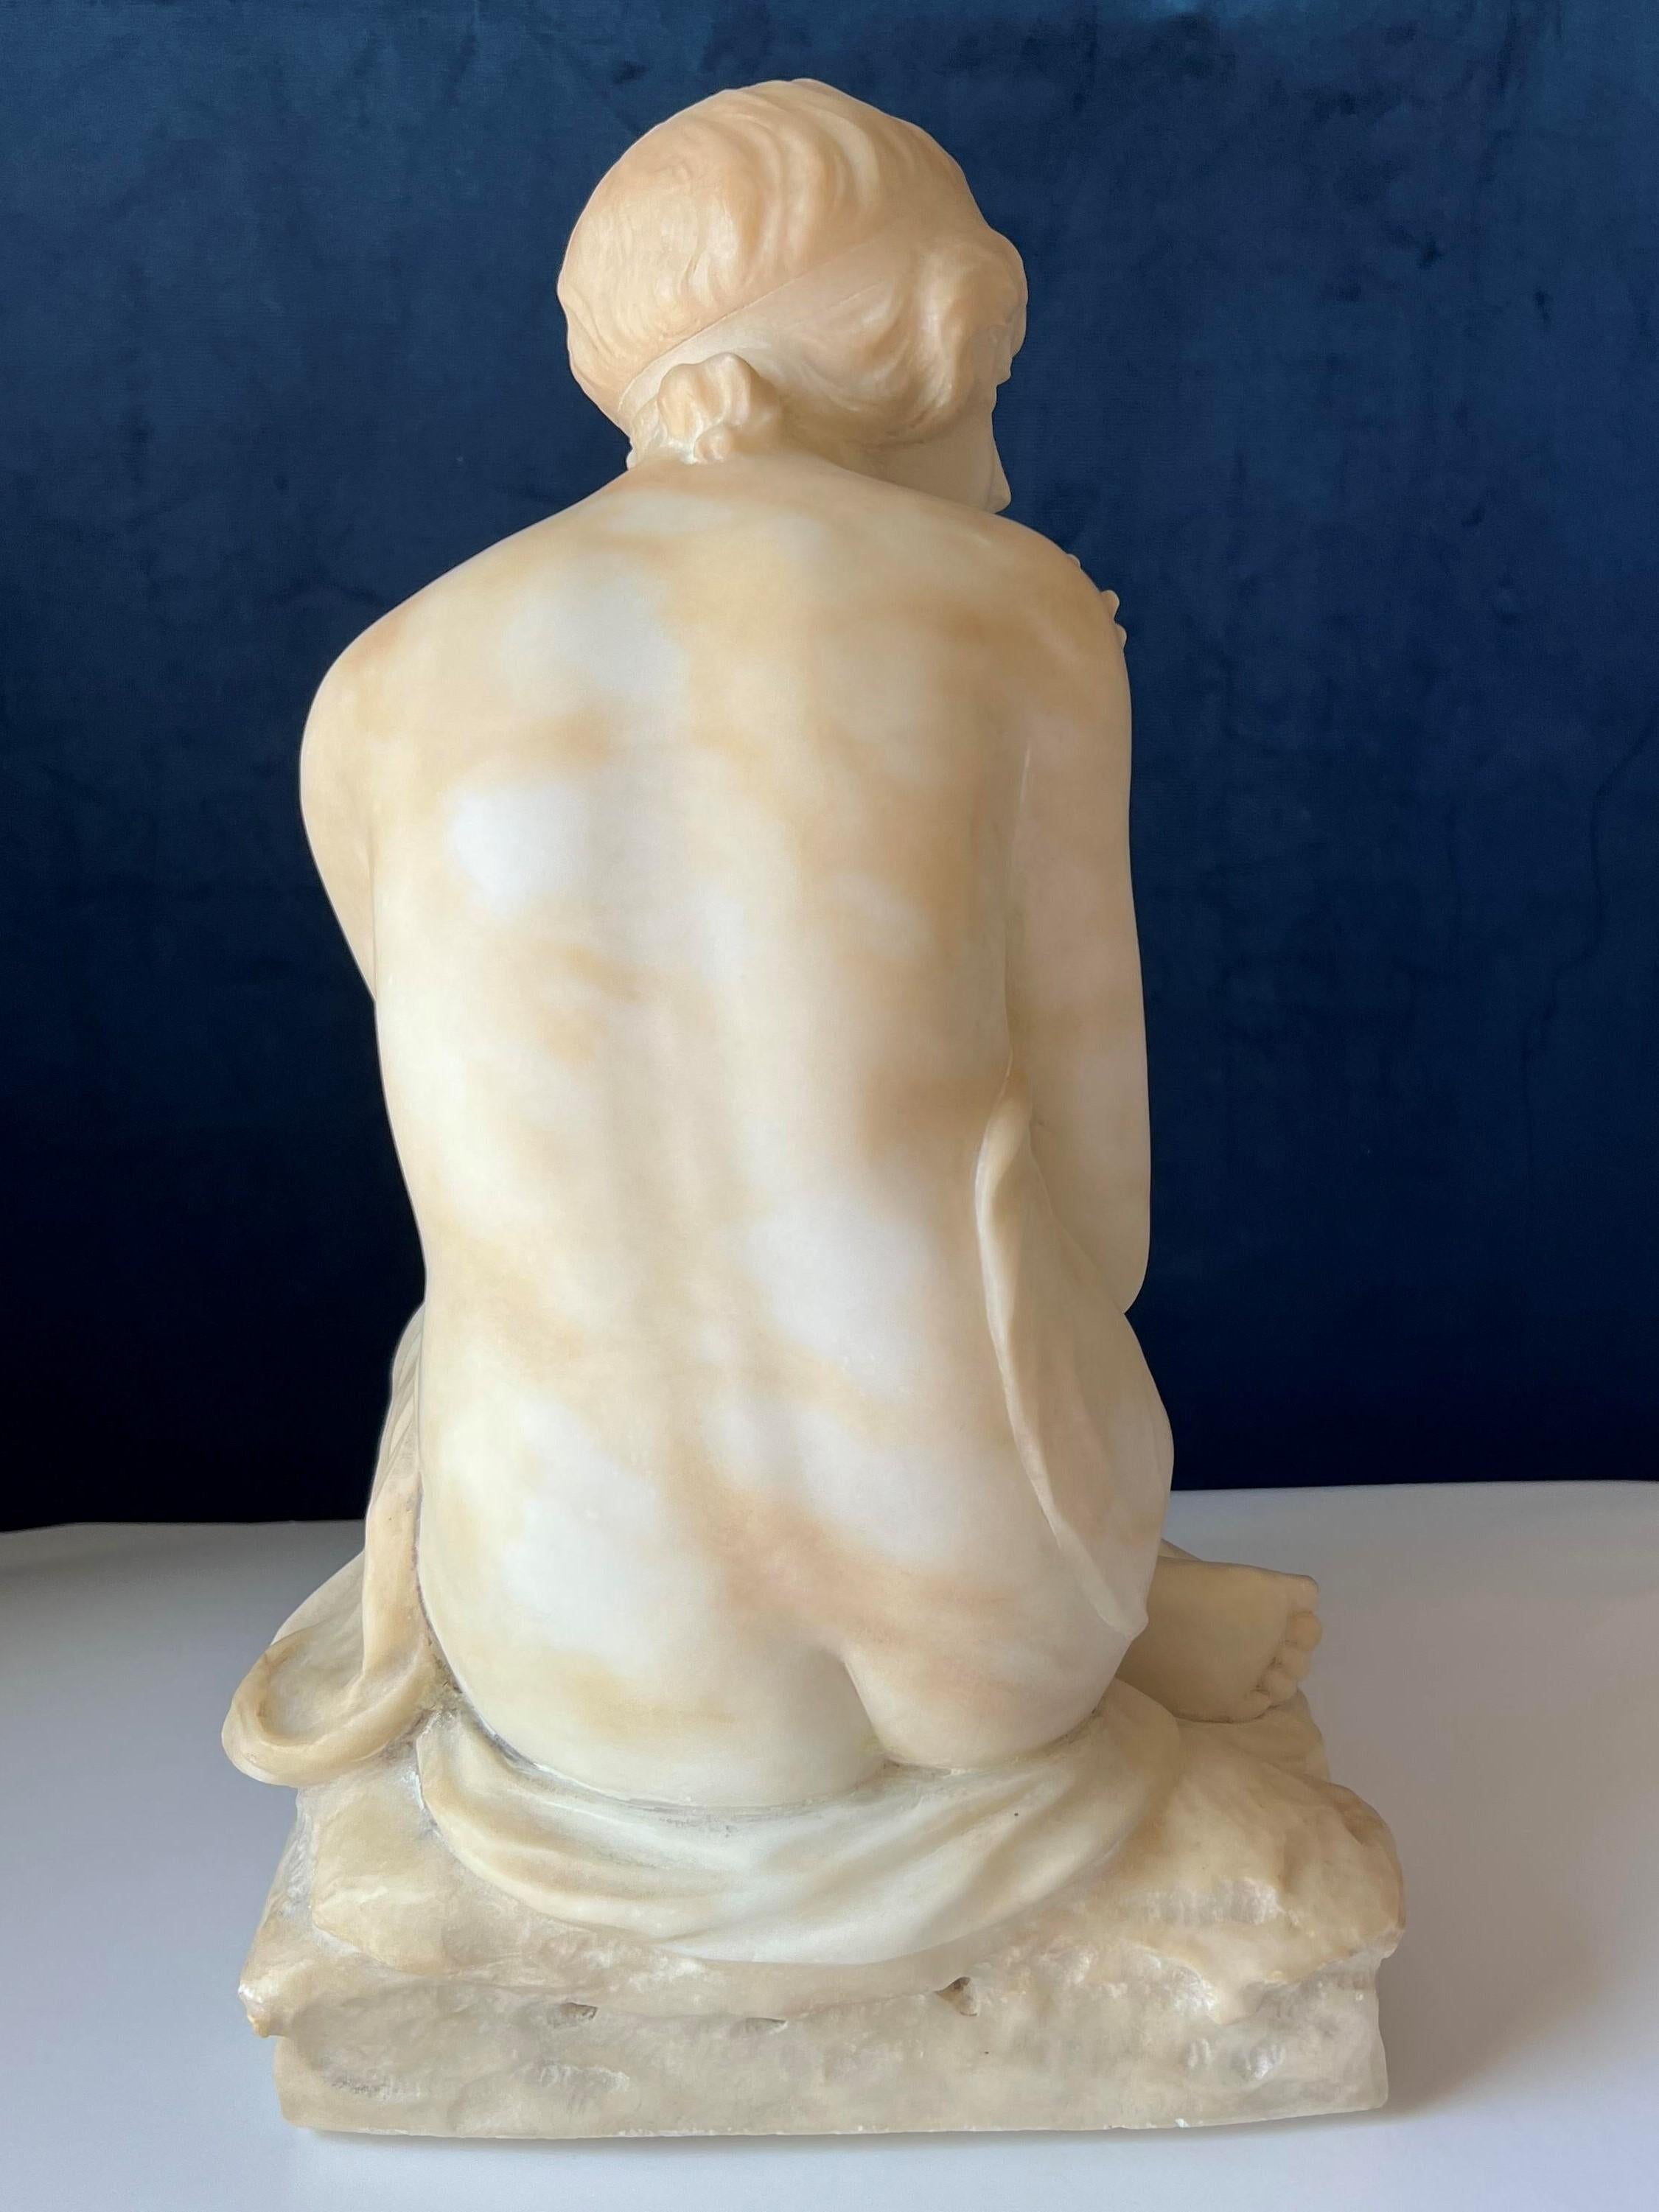 Early 20th C Italian Art Nouveau Alabaster Sculpture of a young female bather.  Bather is seated on a stone with arms crossed in a modest pose.  Bather is semi-nude.  Some minor scuffs and scratches.  Sculpture is unsigned.  Late 19th/ Early 20th C.